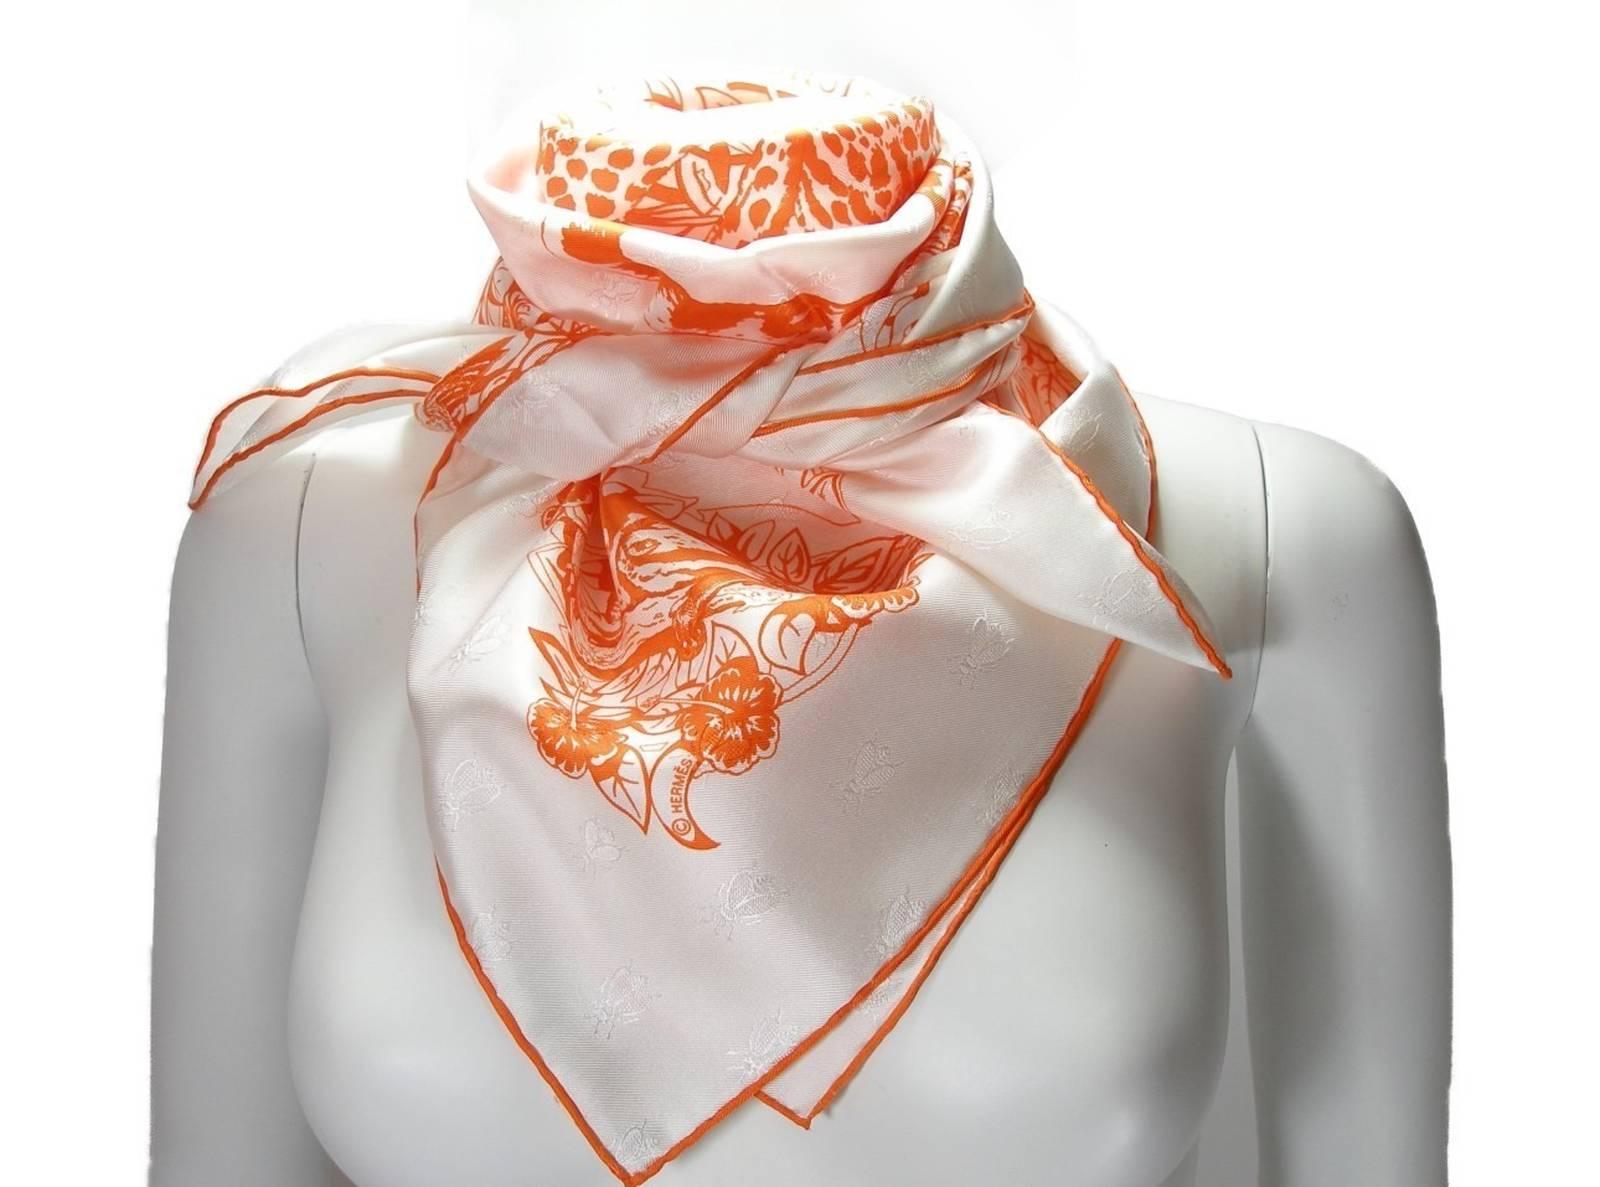 This is a rare scarf is designed by Dallet. 
This scarf is a real piece of art! You will enjoy wearing it.
Jungle Love Tatto
Orange and crème
BRAND NEW
90 cm
Sorry no box
Thank you for visiting my shop !



